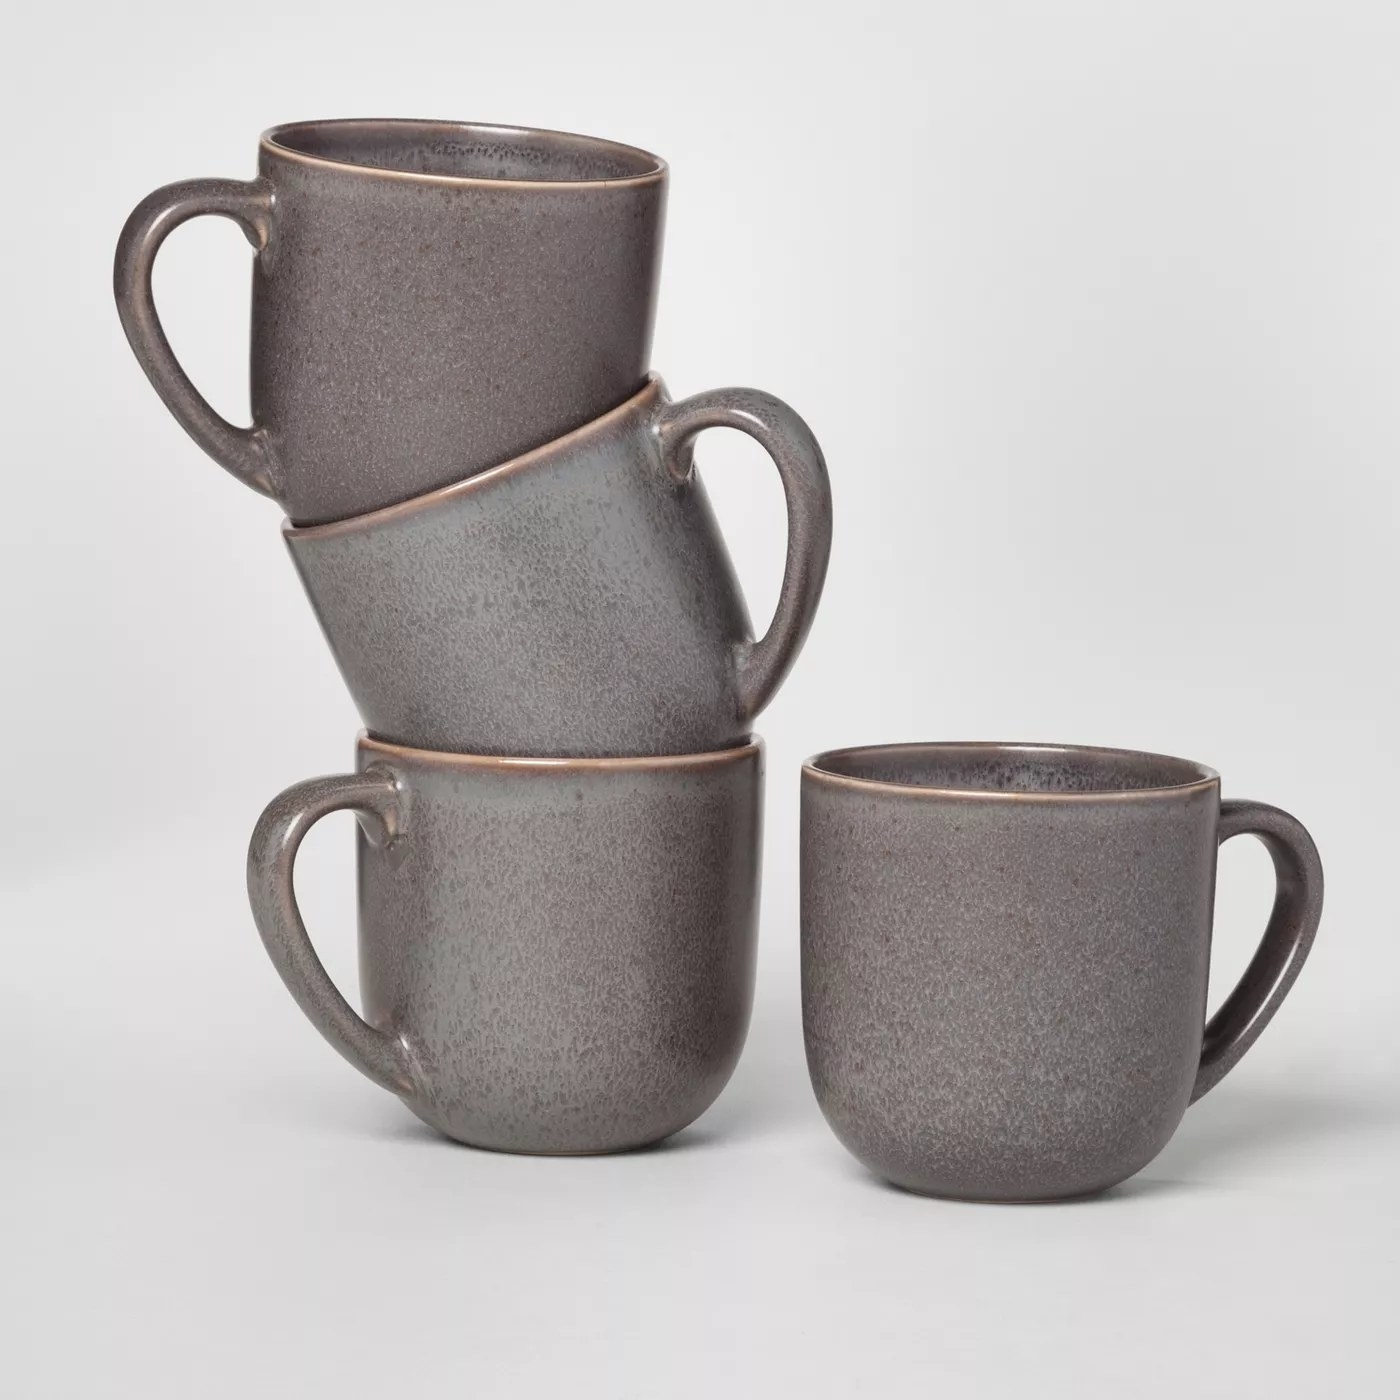 The gray mugs stacked on top of each other